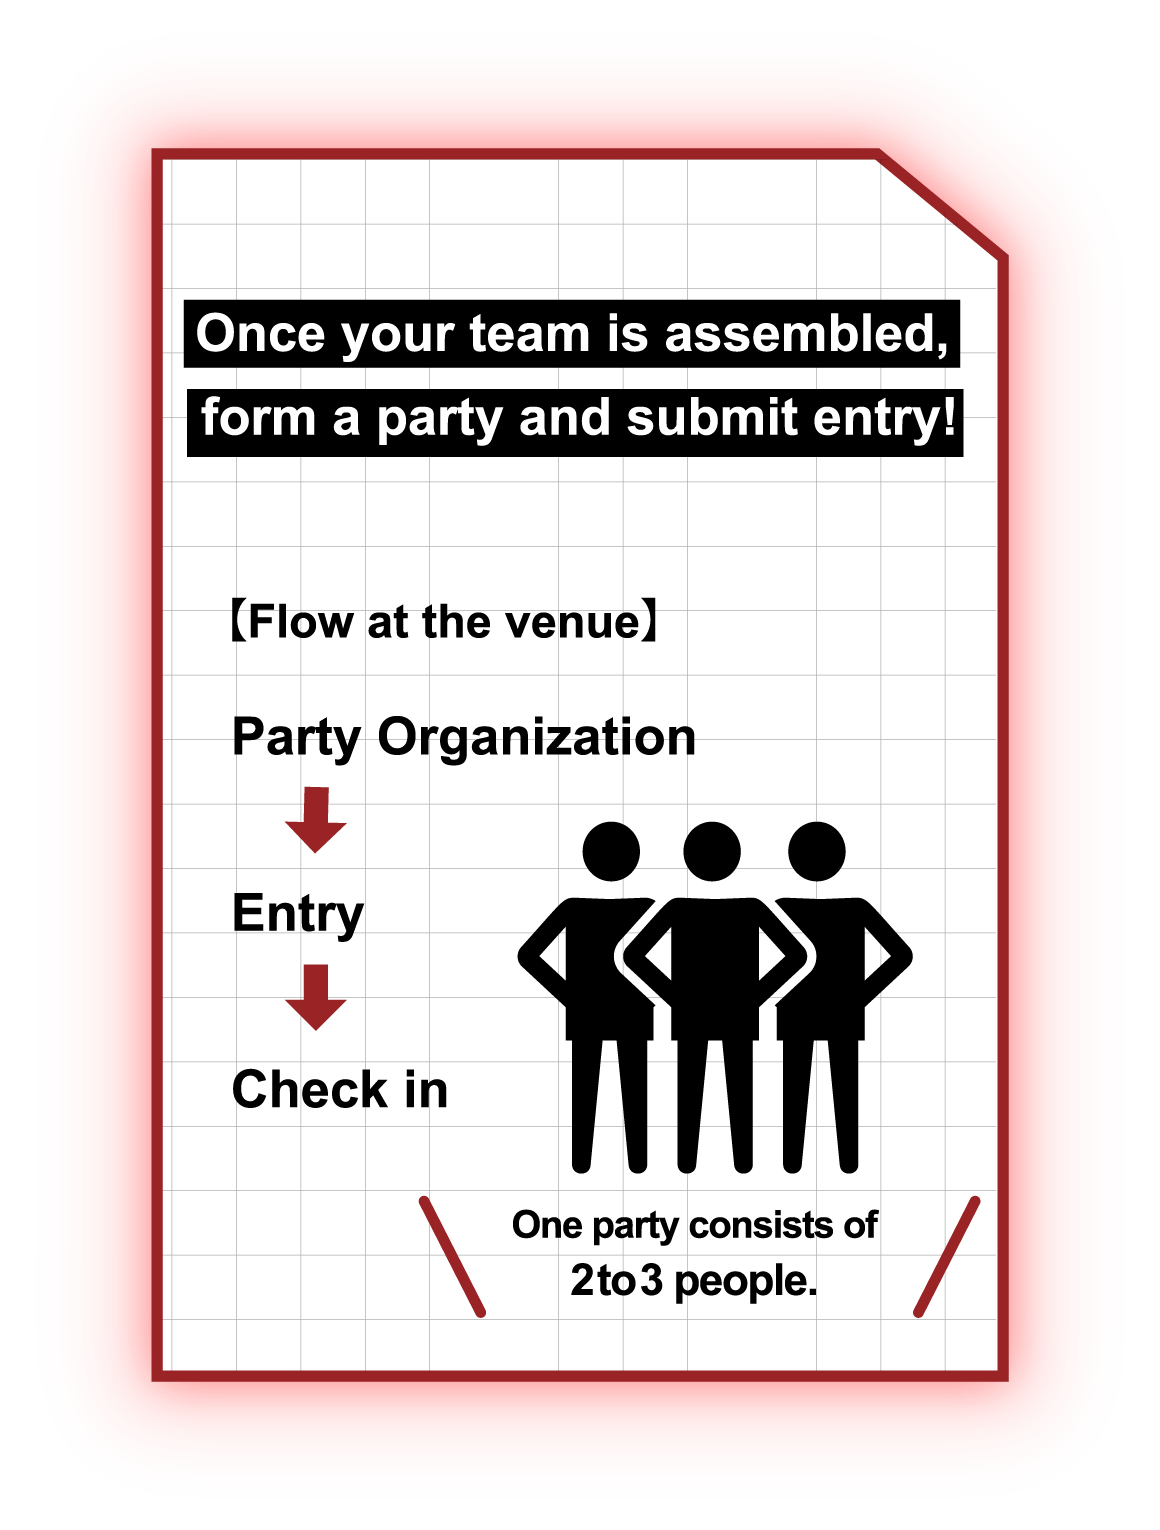 Organaize a party whon all the playersget ready and go for an entry 【Flow at the venue】 Party Organization Entry Check in One party consists of 2 to 3 people.